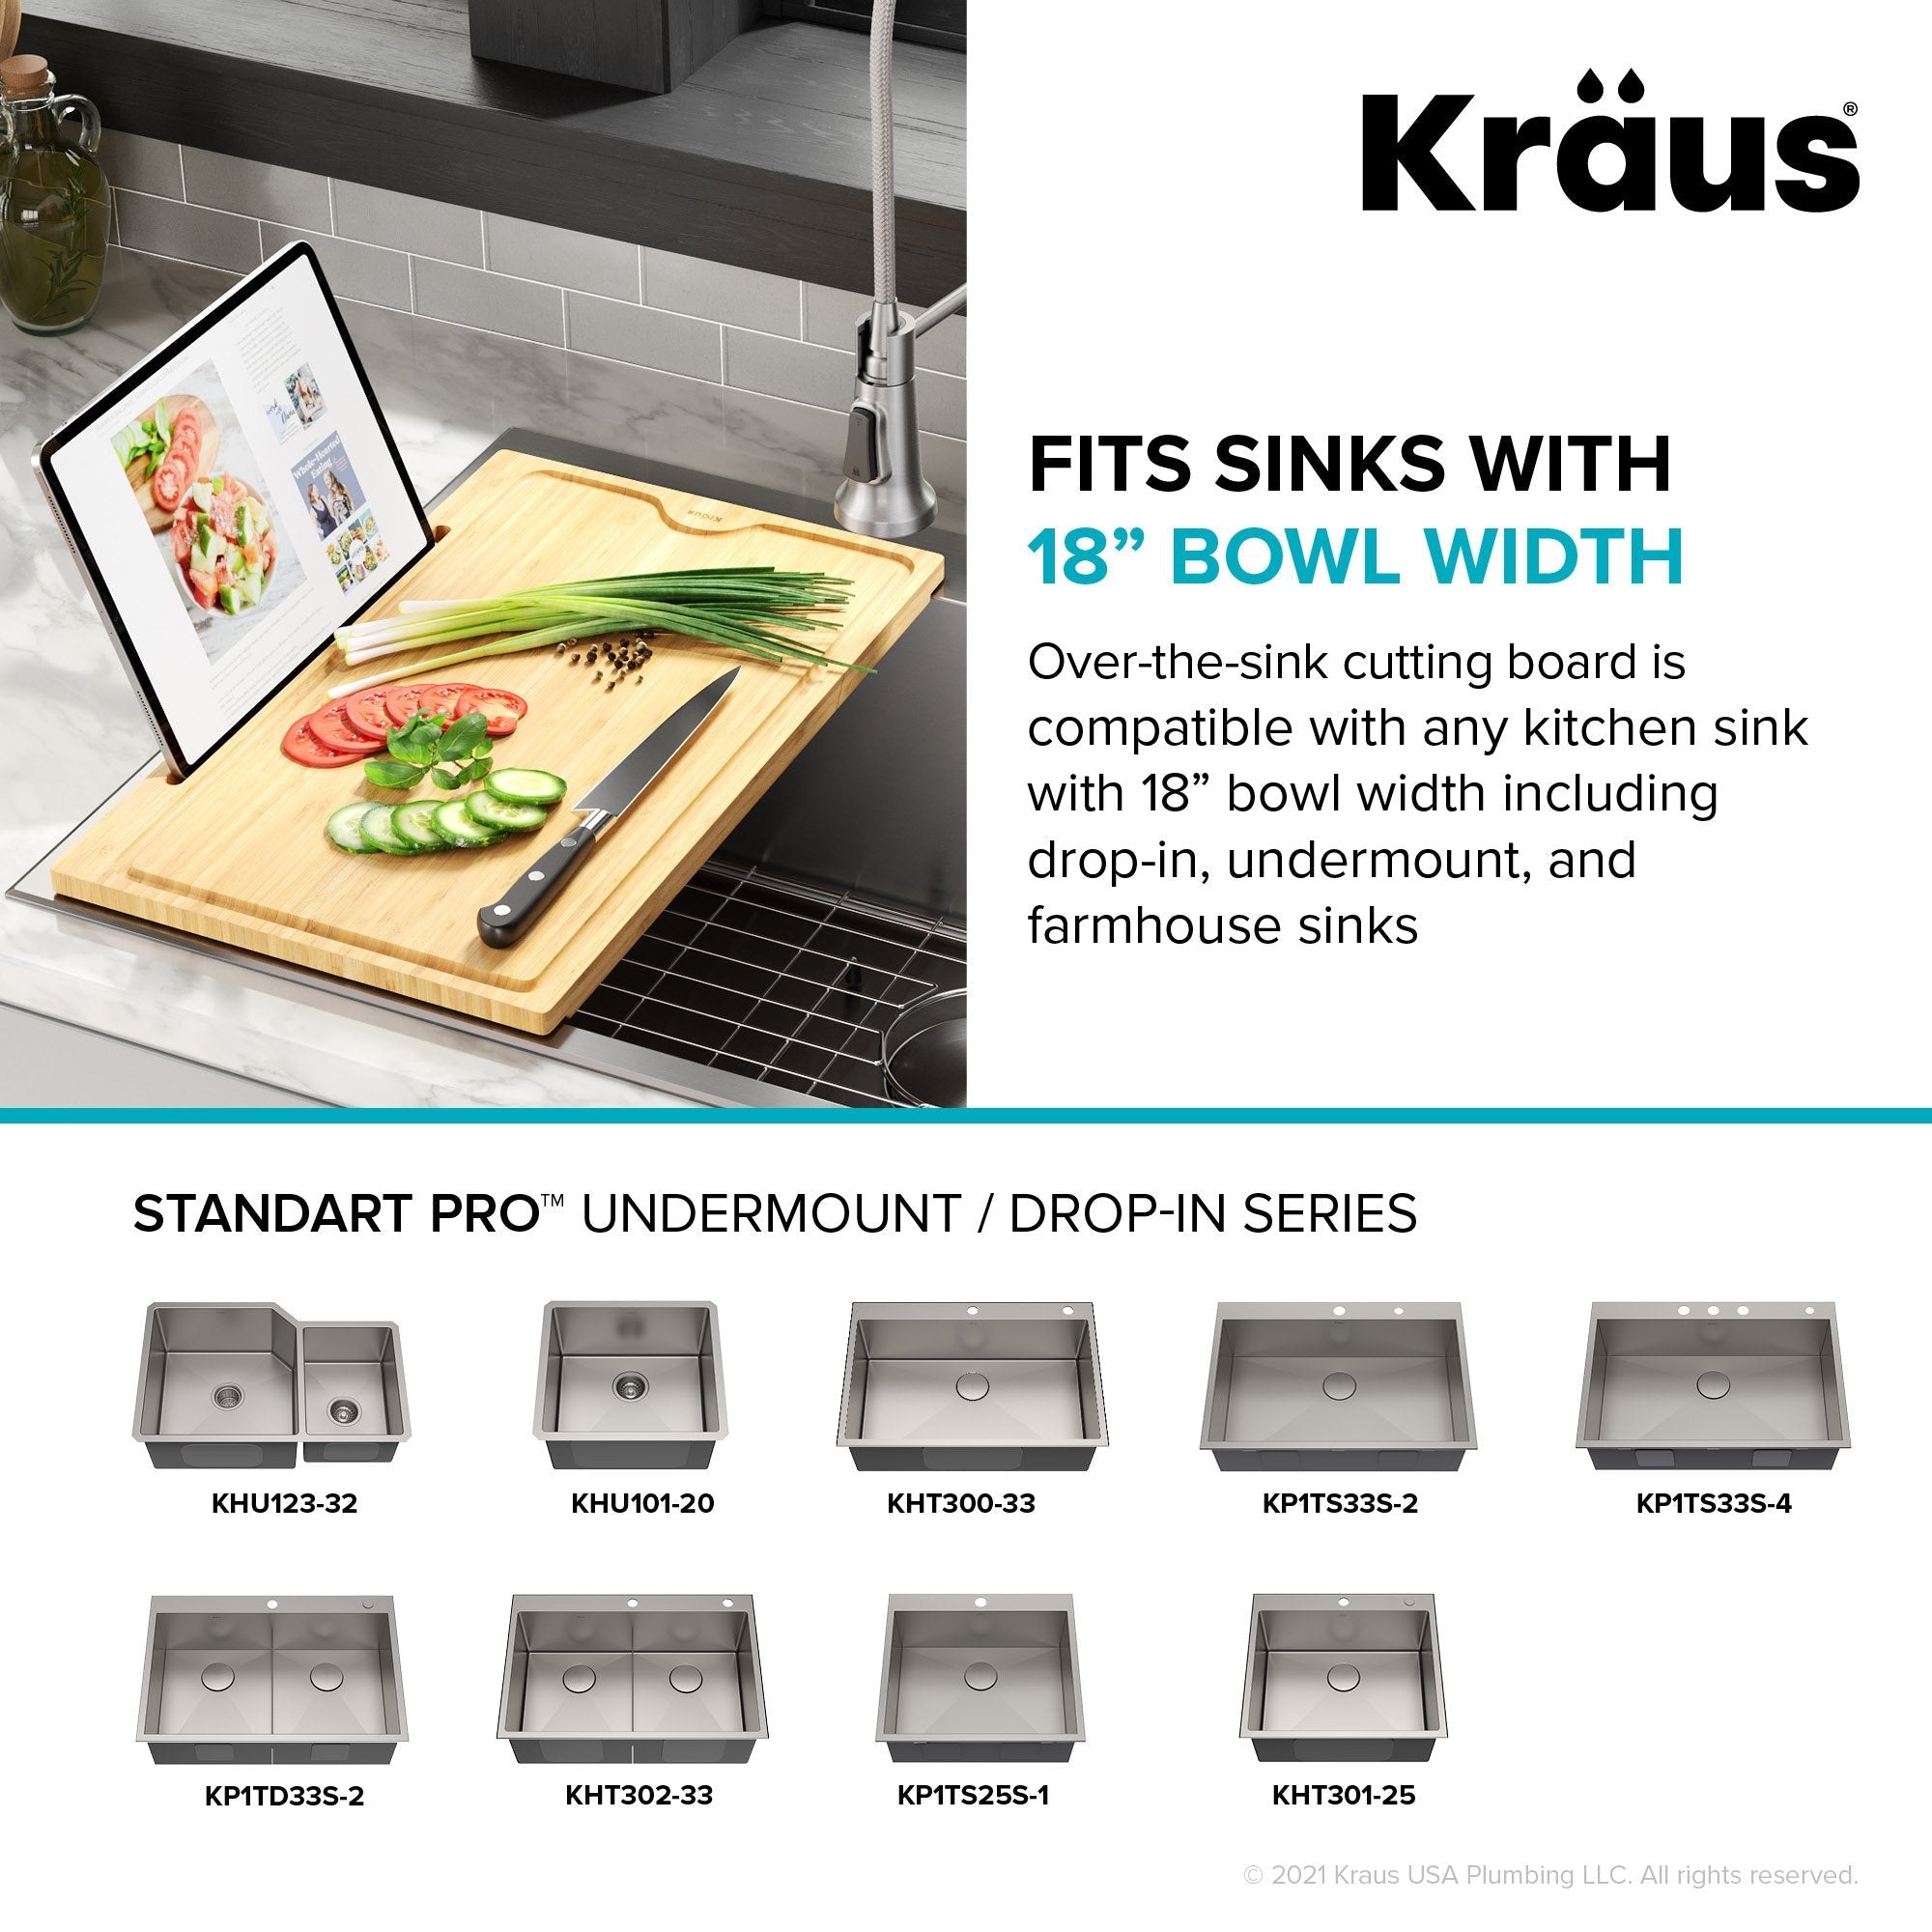 Solid Bamboo Cutting Board with Mobile Device Holder for Standard Kitchen  Sink or Countertop Measuring 19-1/2'' W x 12'' D x 3/4'' H by KRAUS